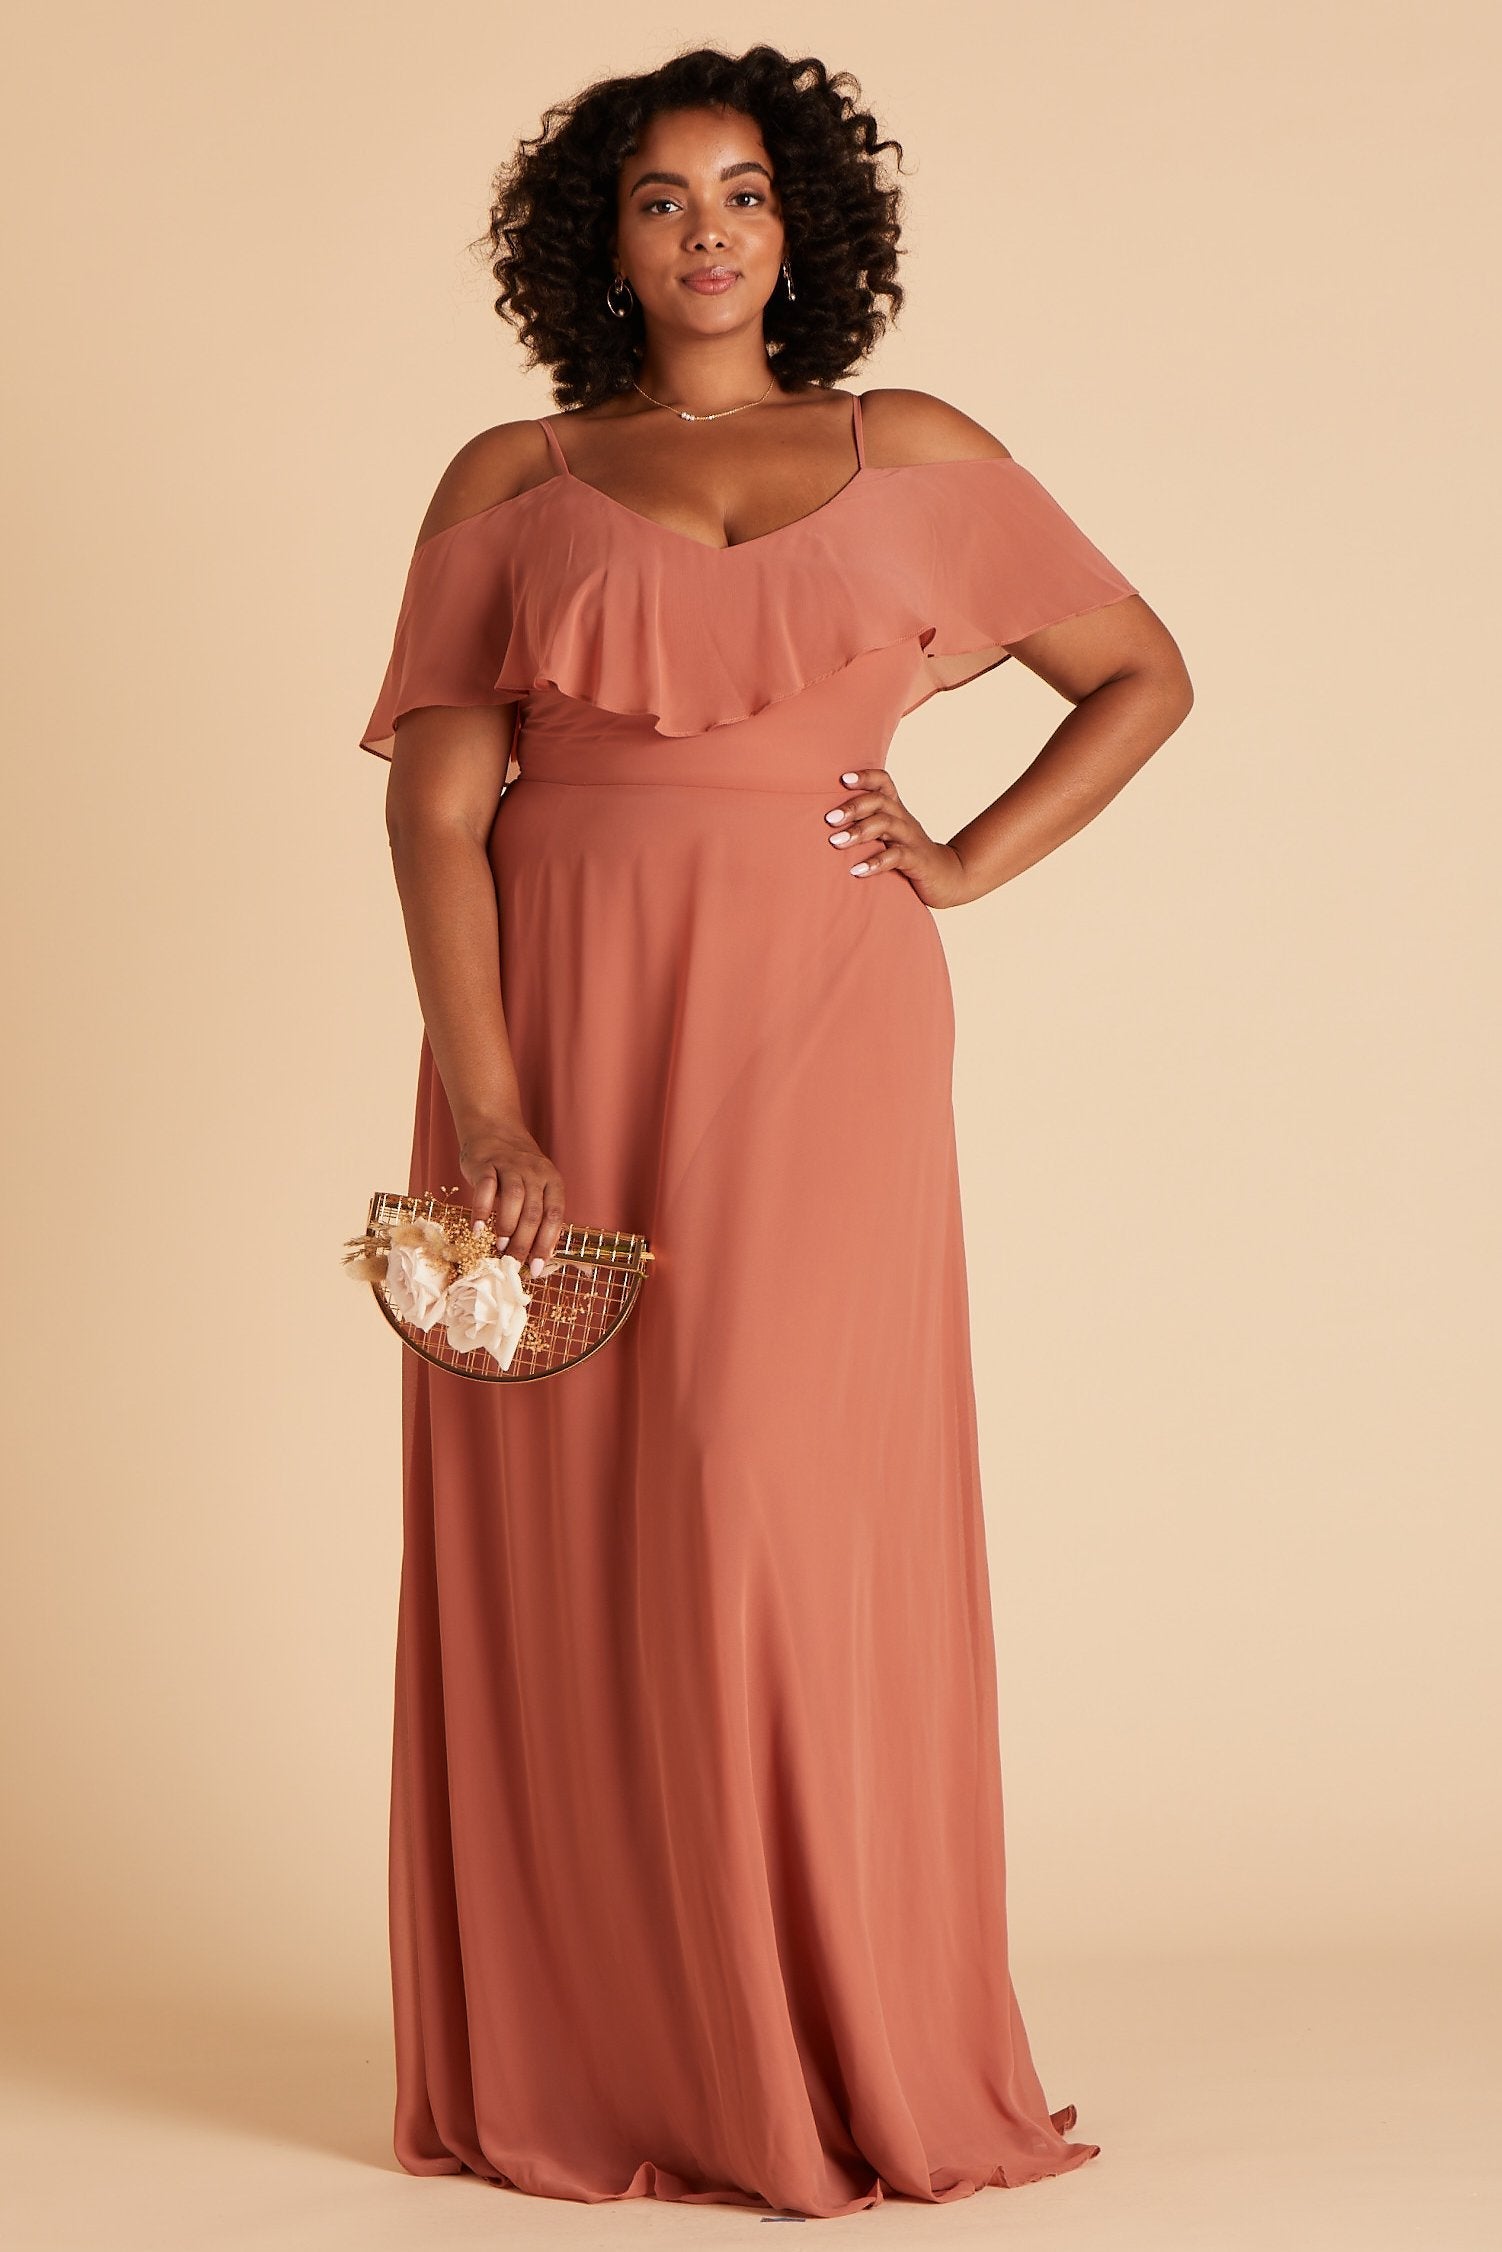 Jane convertible plus size bridesmaid dress in terracotta orange chiffon by Birdy Grey, front view